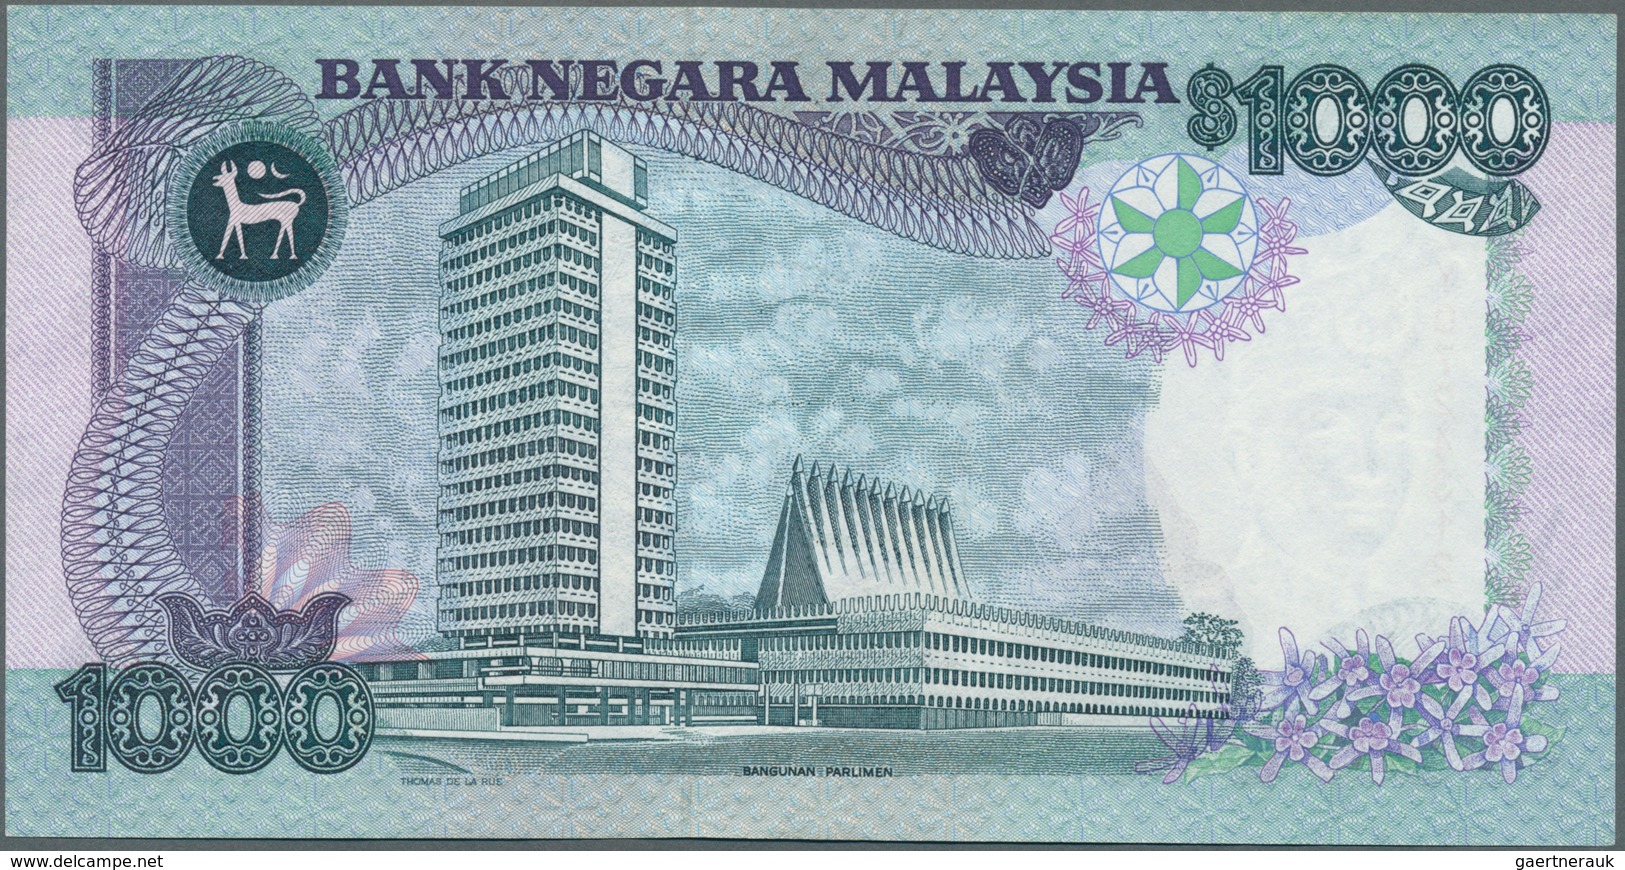 01994 Malaysia: 1000 Ringgit ND P. 34, In Condition: AUNC. - Malasia